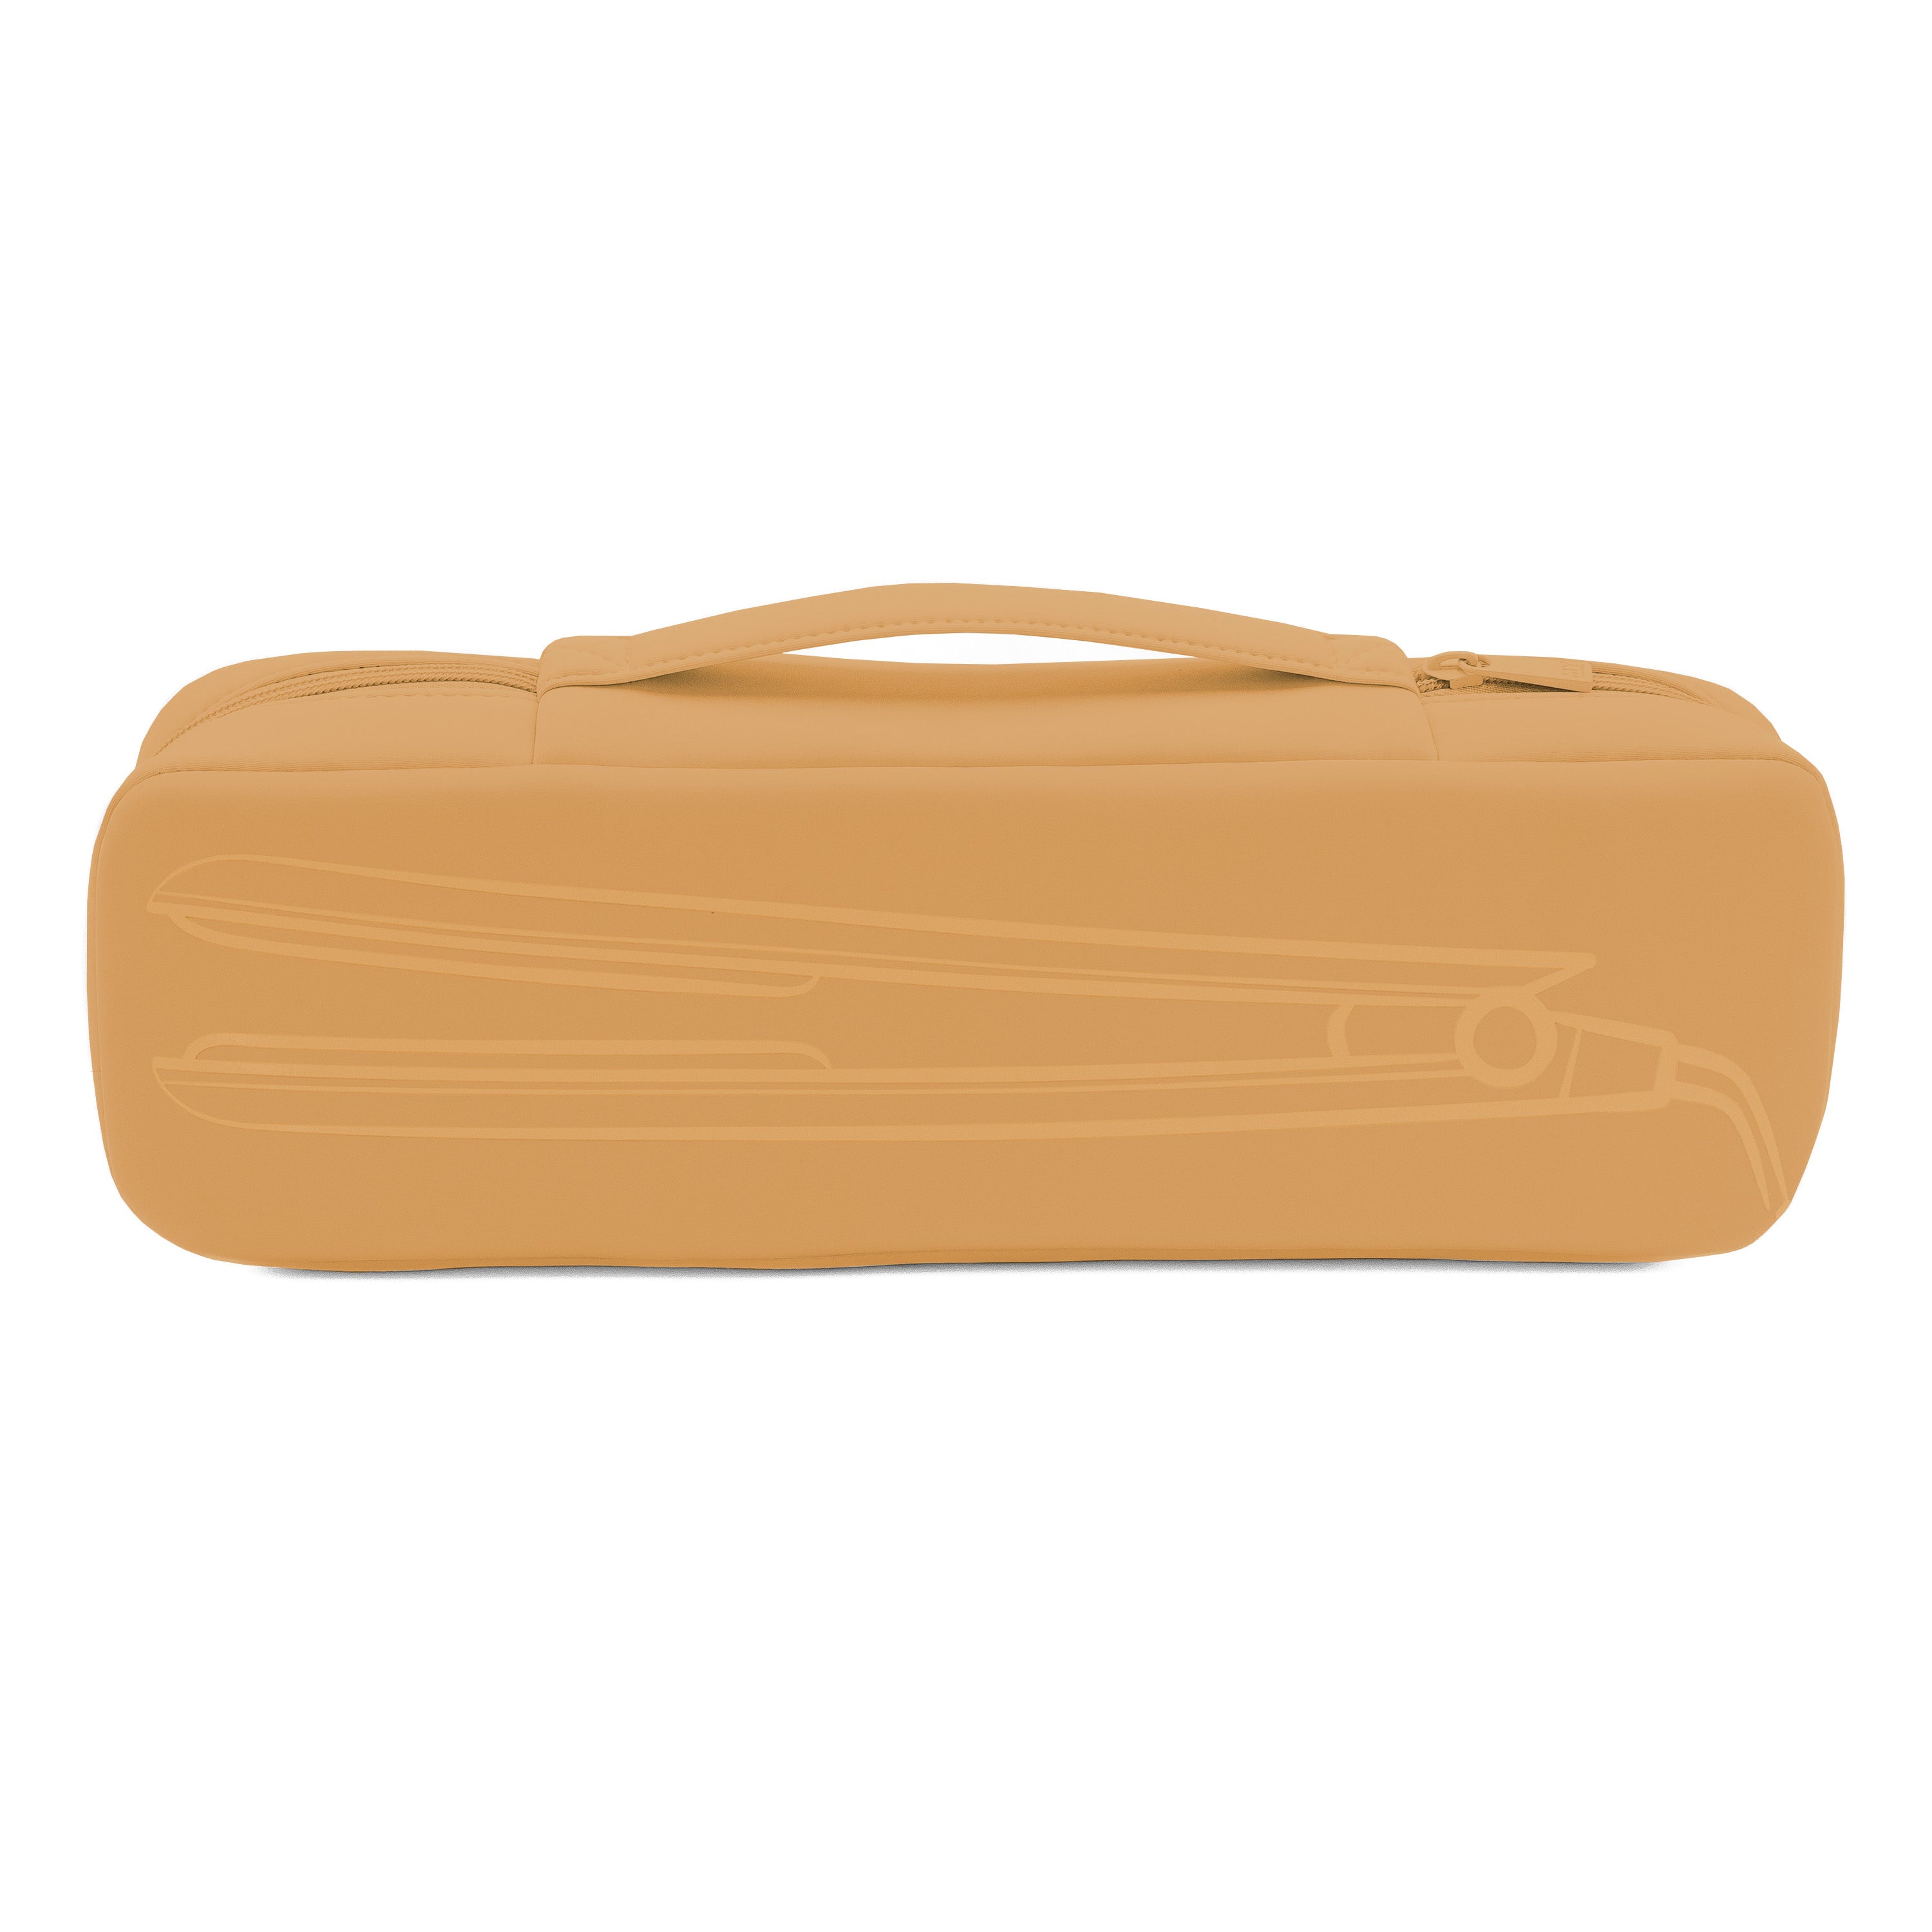 THE DELUXE HAIR TOOLS CADDY - CARAMEL